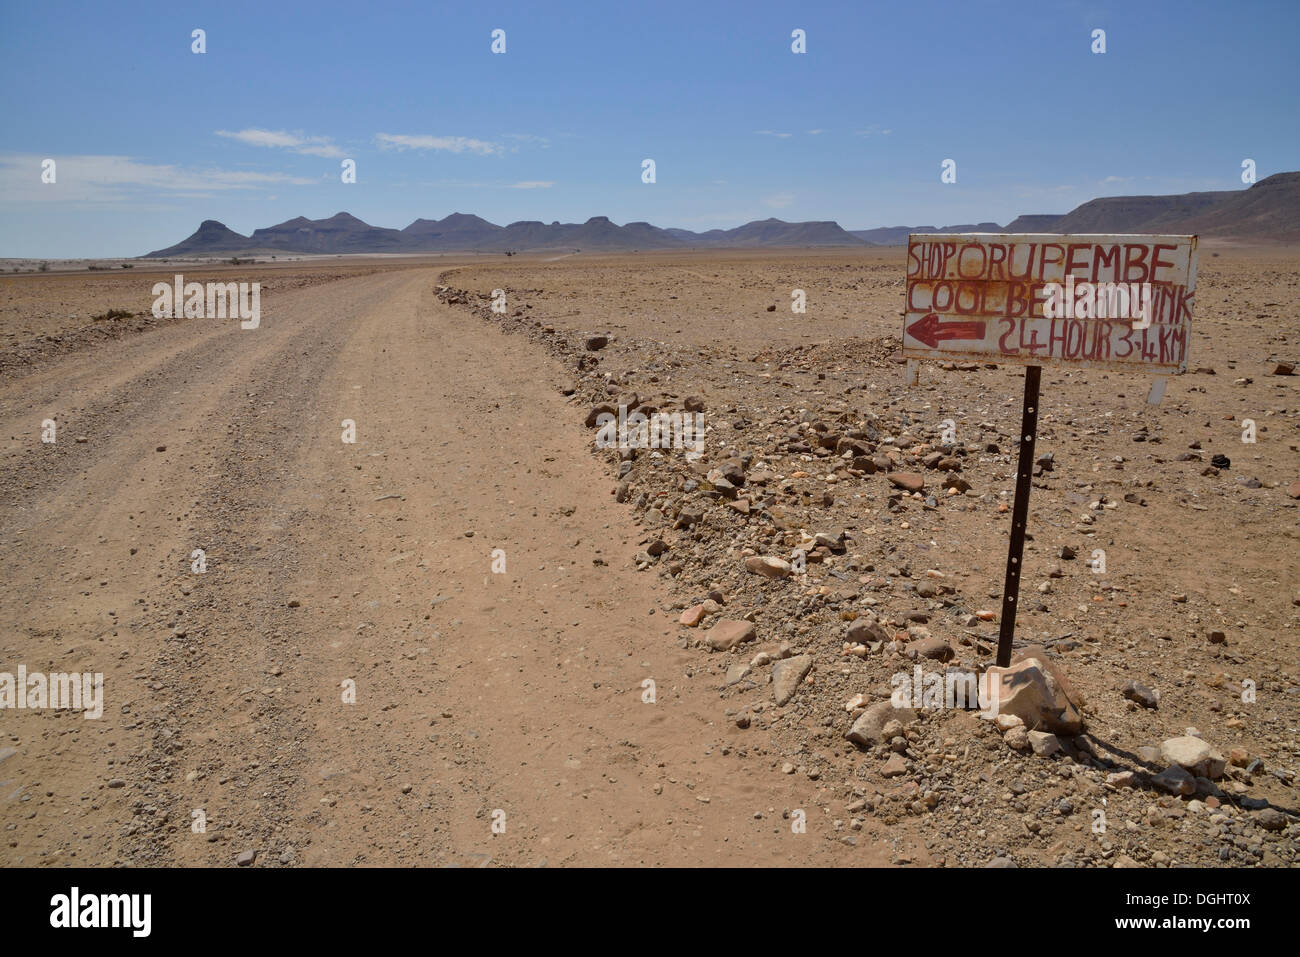 Hand-painted advertising sign for a liquor store on a dirt road in a barren landscape, Orupembe, Kaokoland, Kunene, Namibia Stock Photo